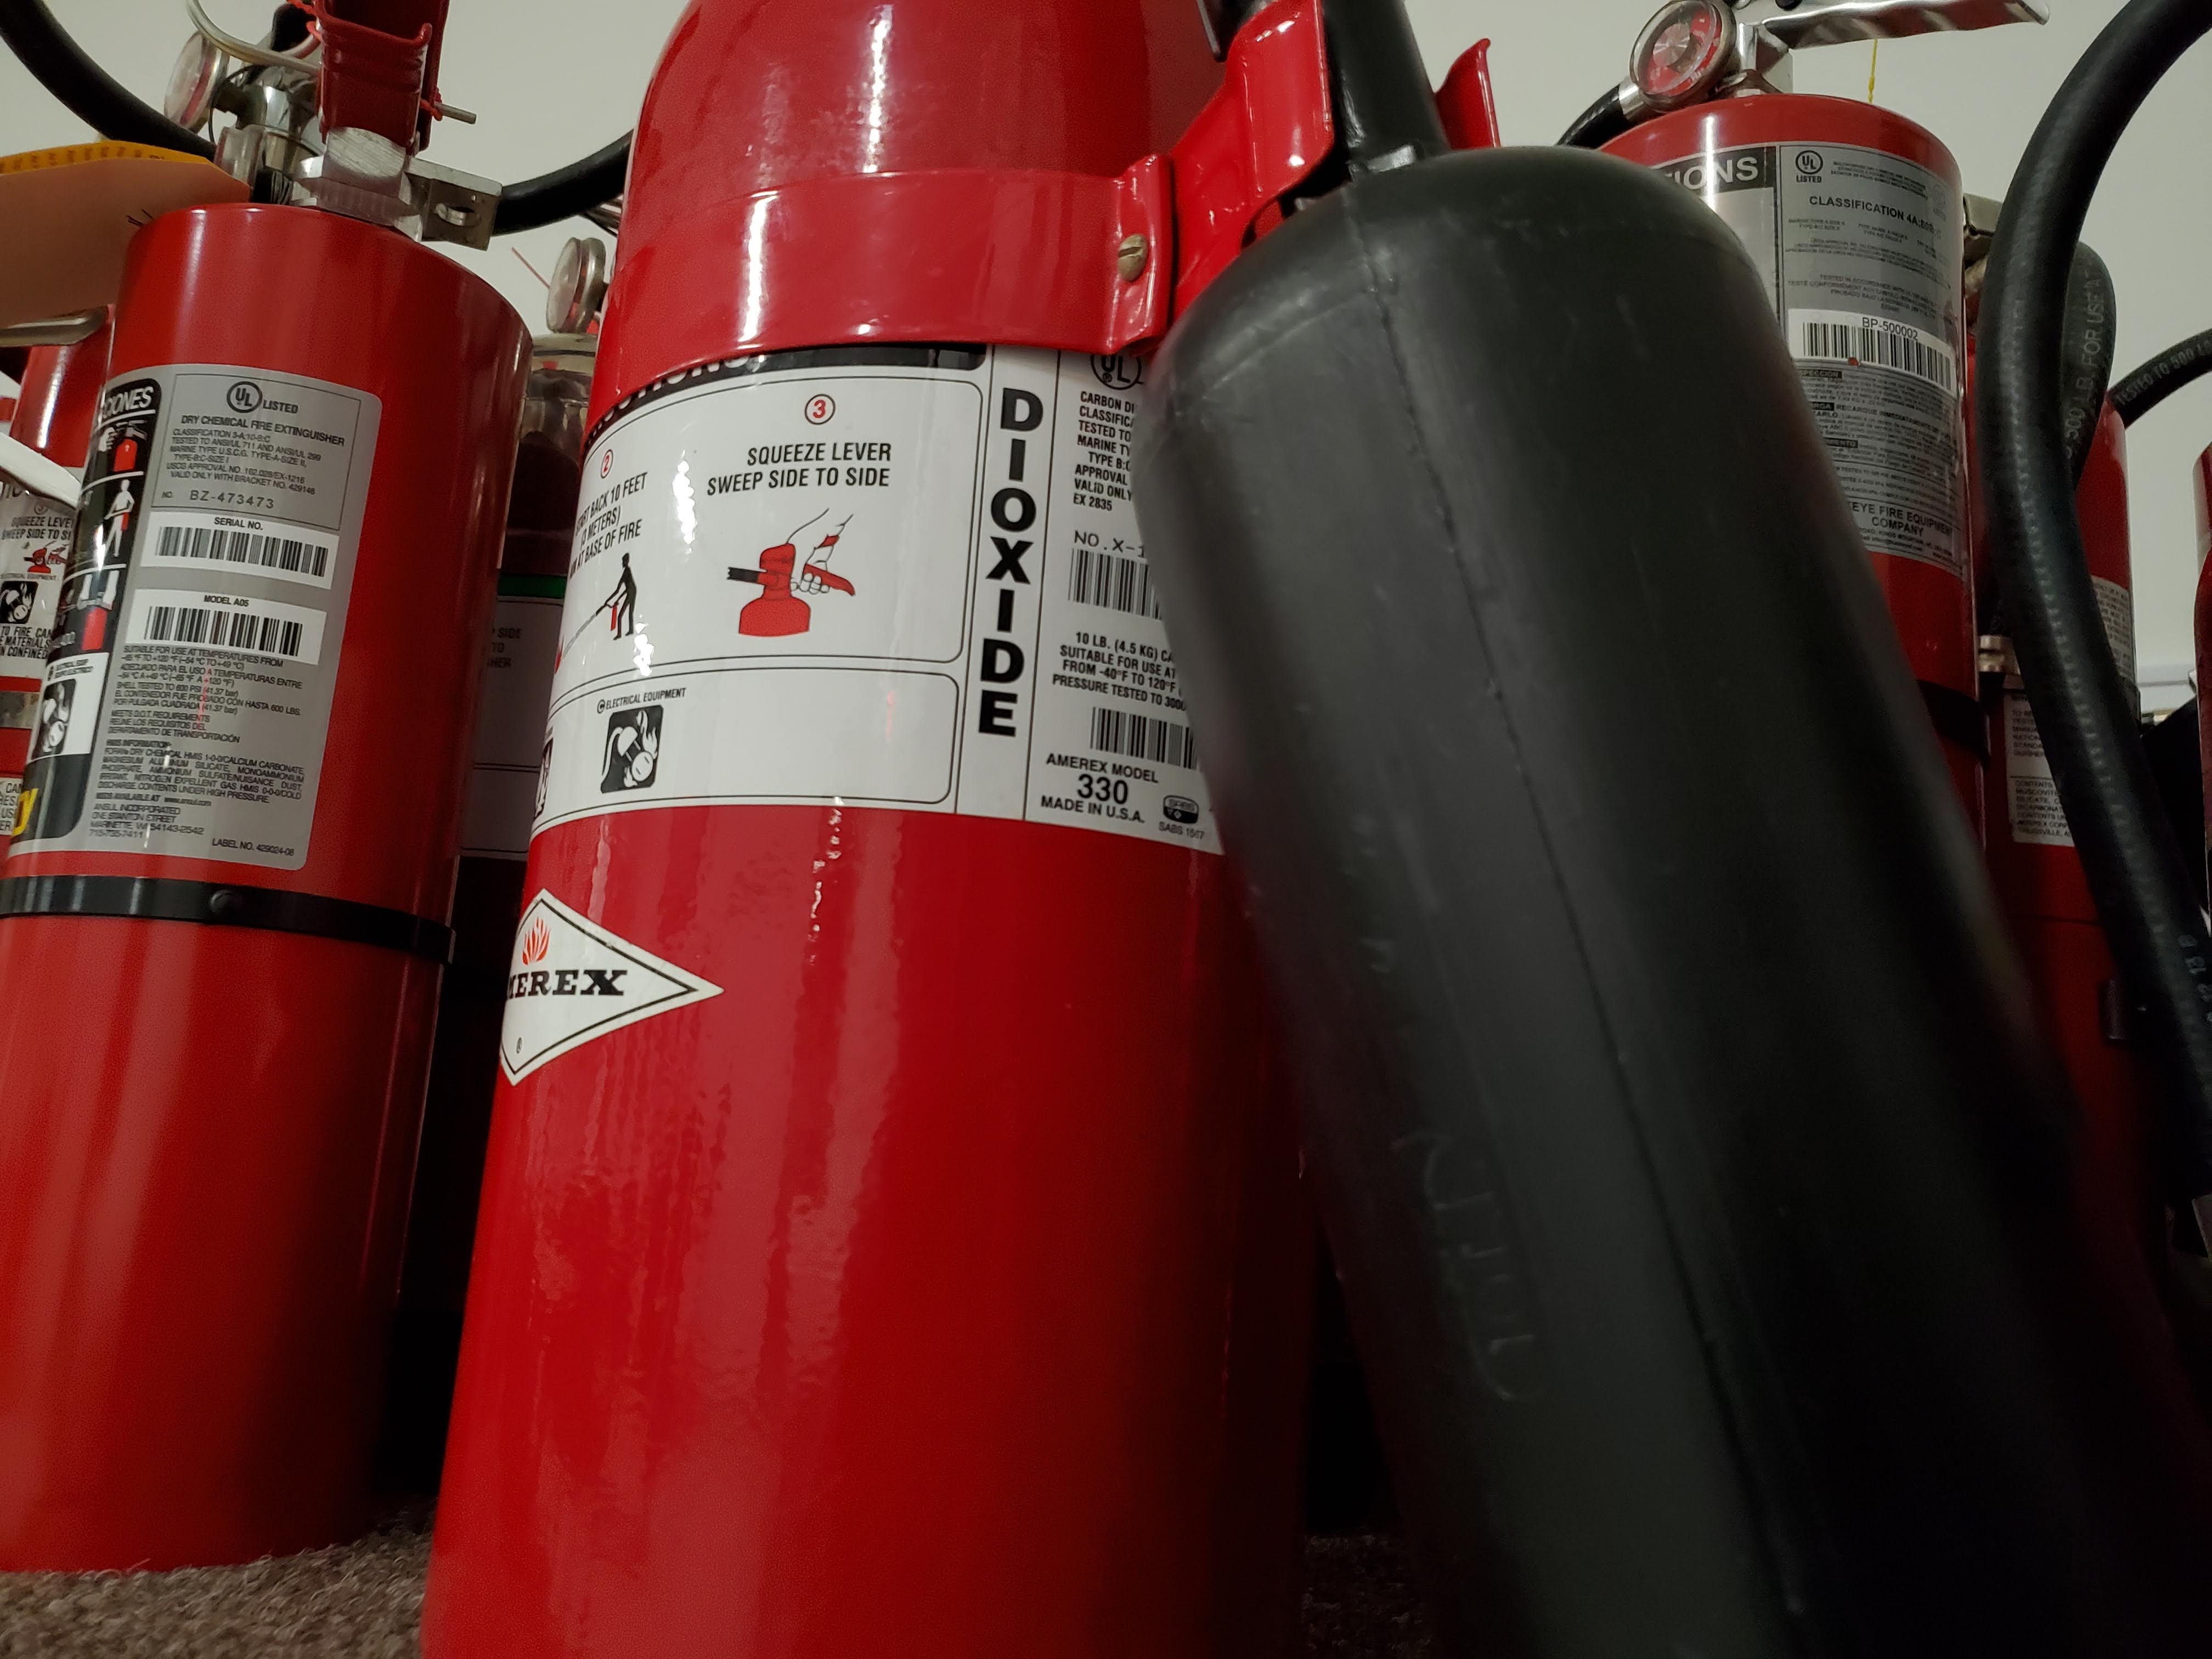 Fire Extinguisher Facts that Every Safety Professional Should Know